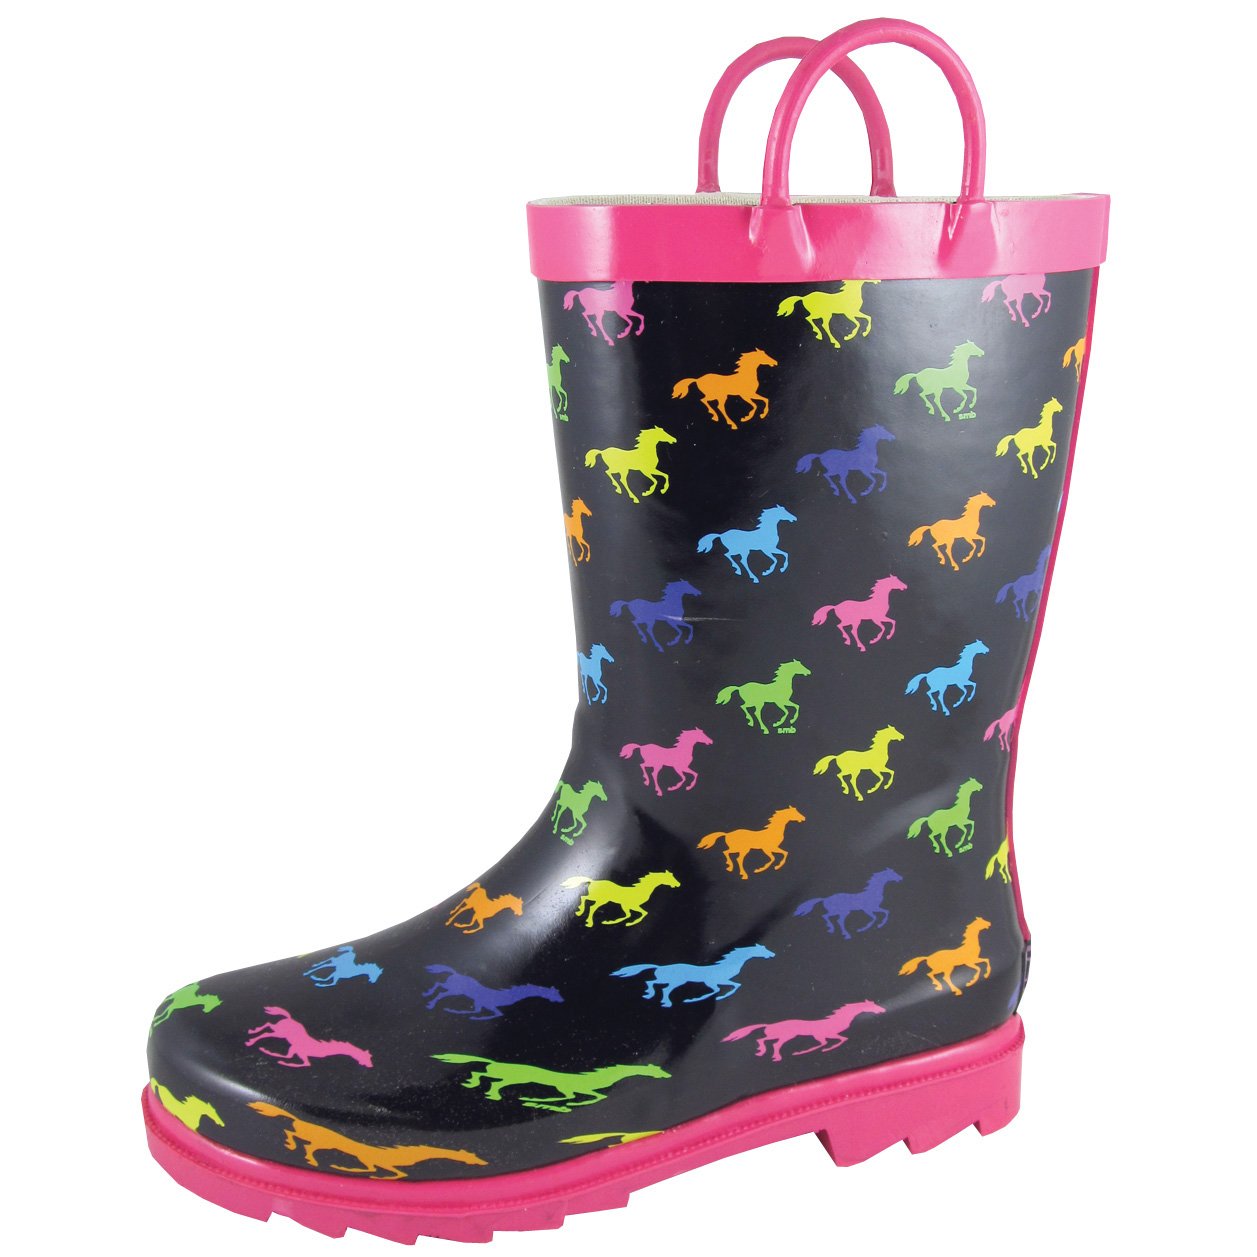 Smoky Mountain Girl's Children's Black Rubber Boot With Multi Color Ponies